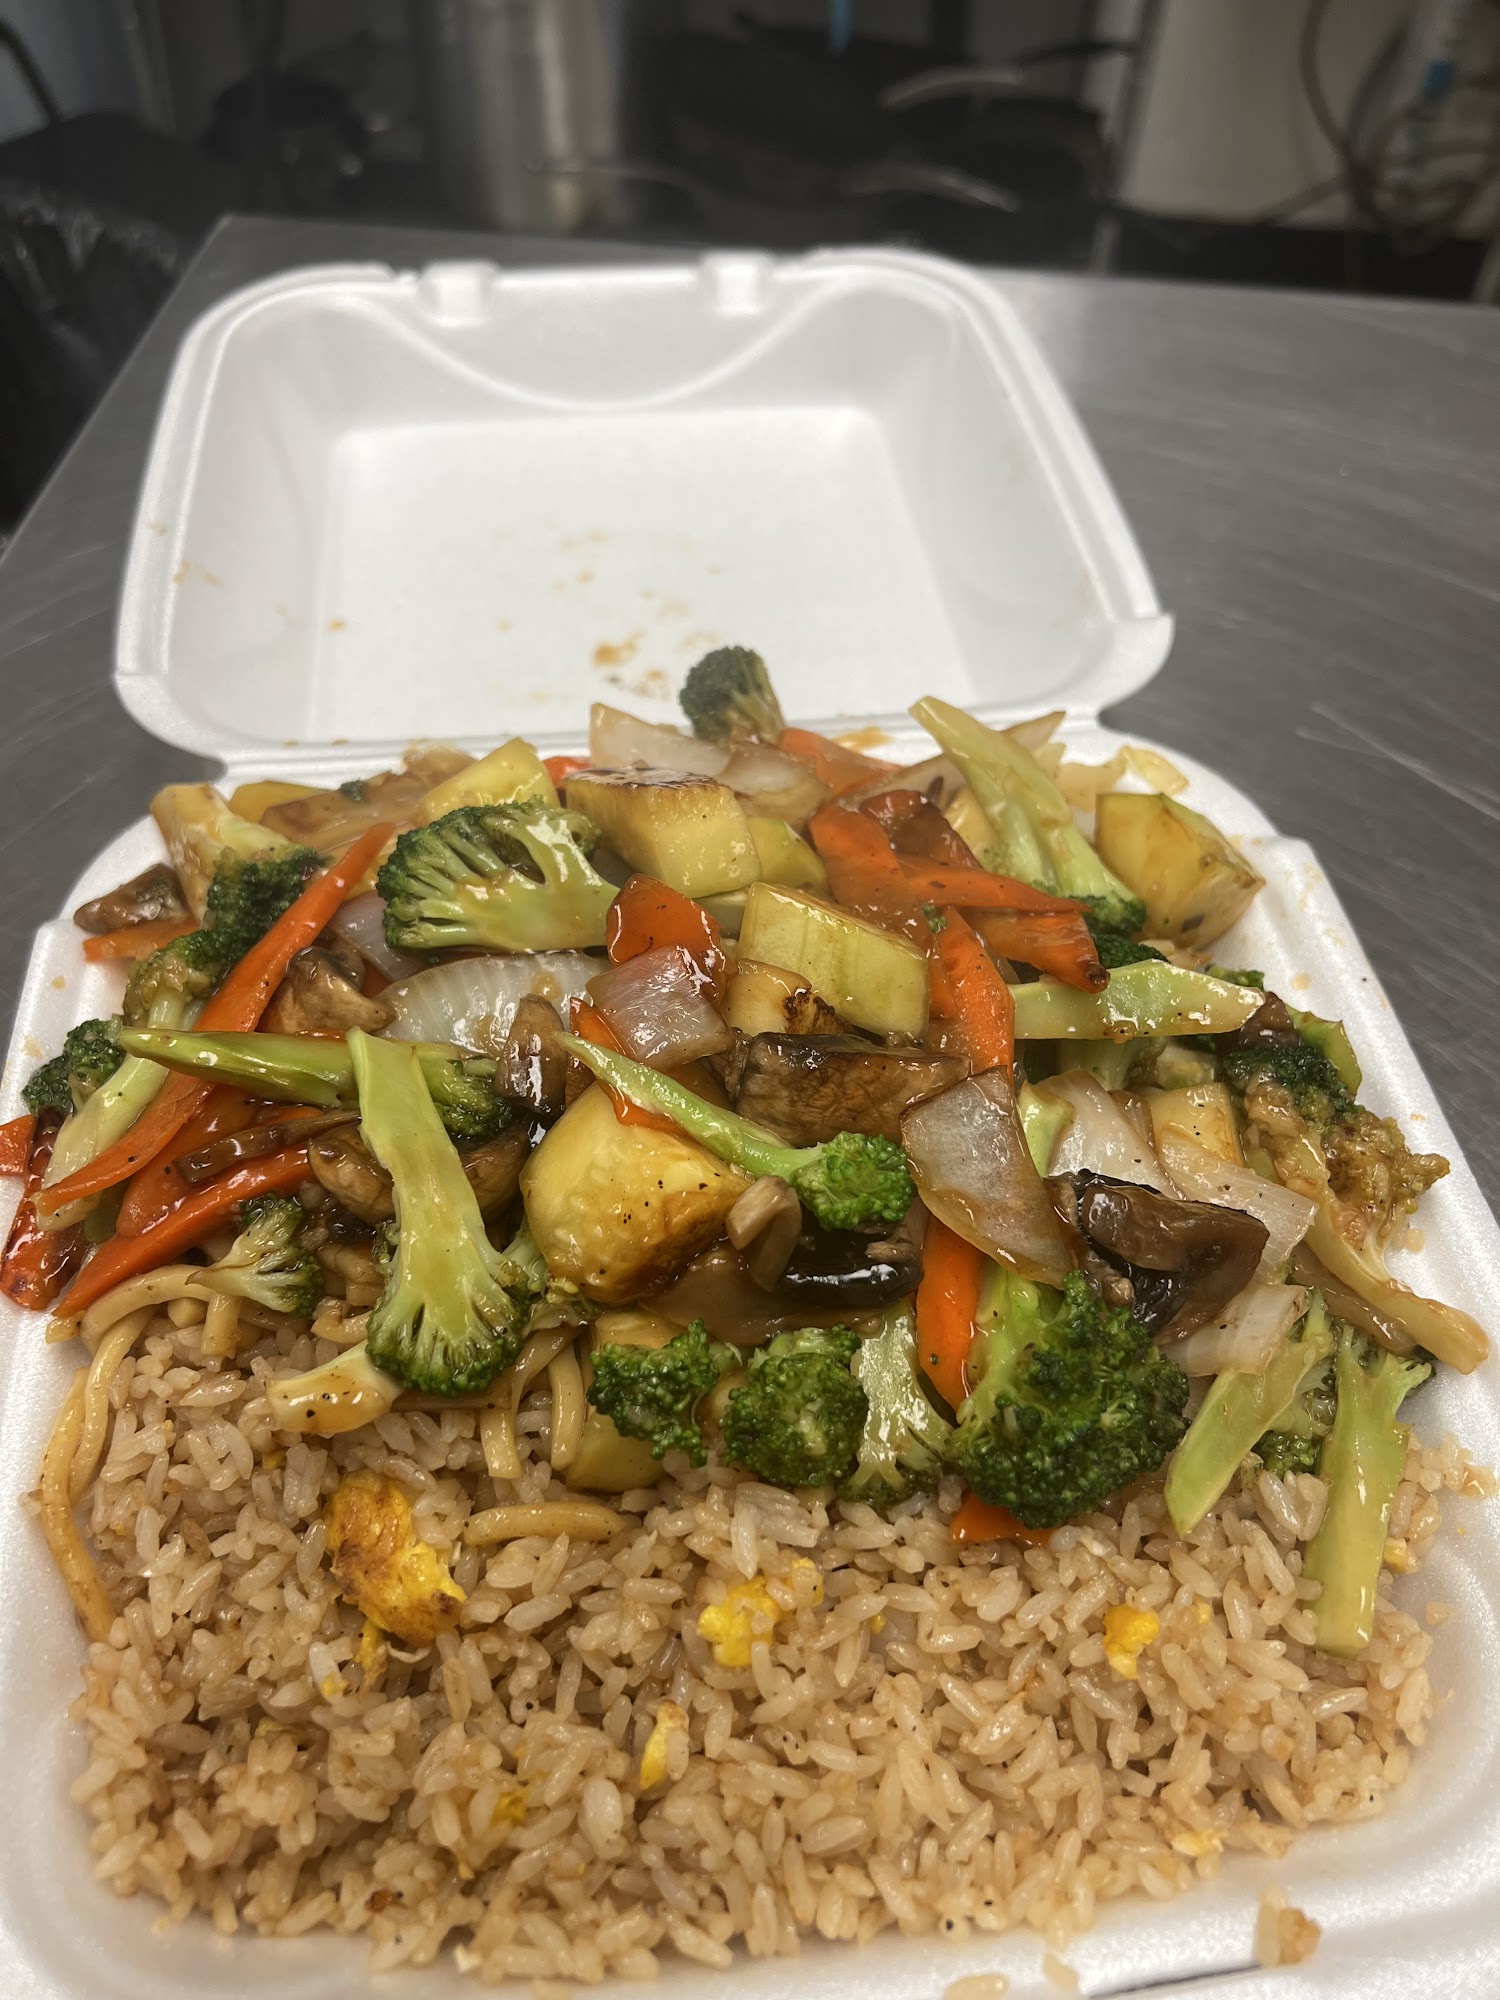 Dede's Hibachi Express 4261 Mayfield Rd, South Euclid, OH 44121